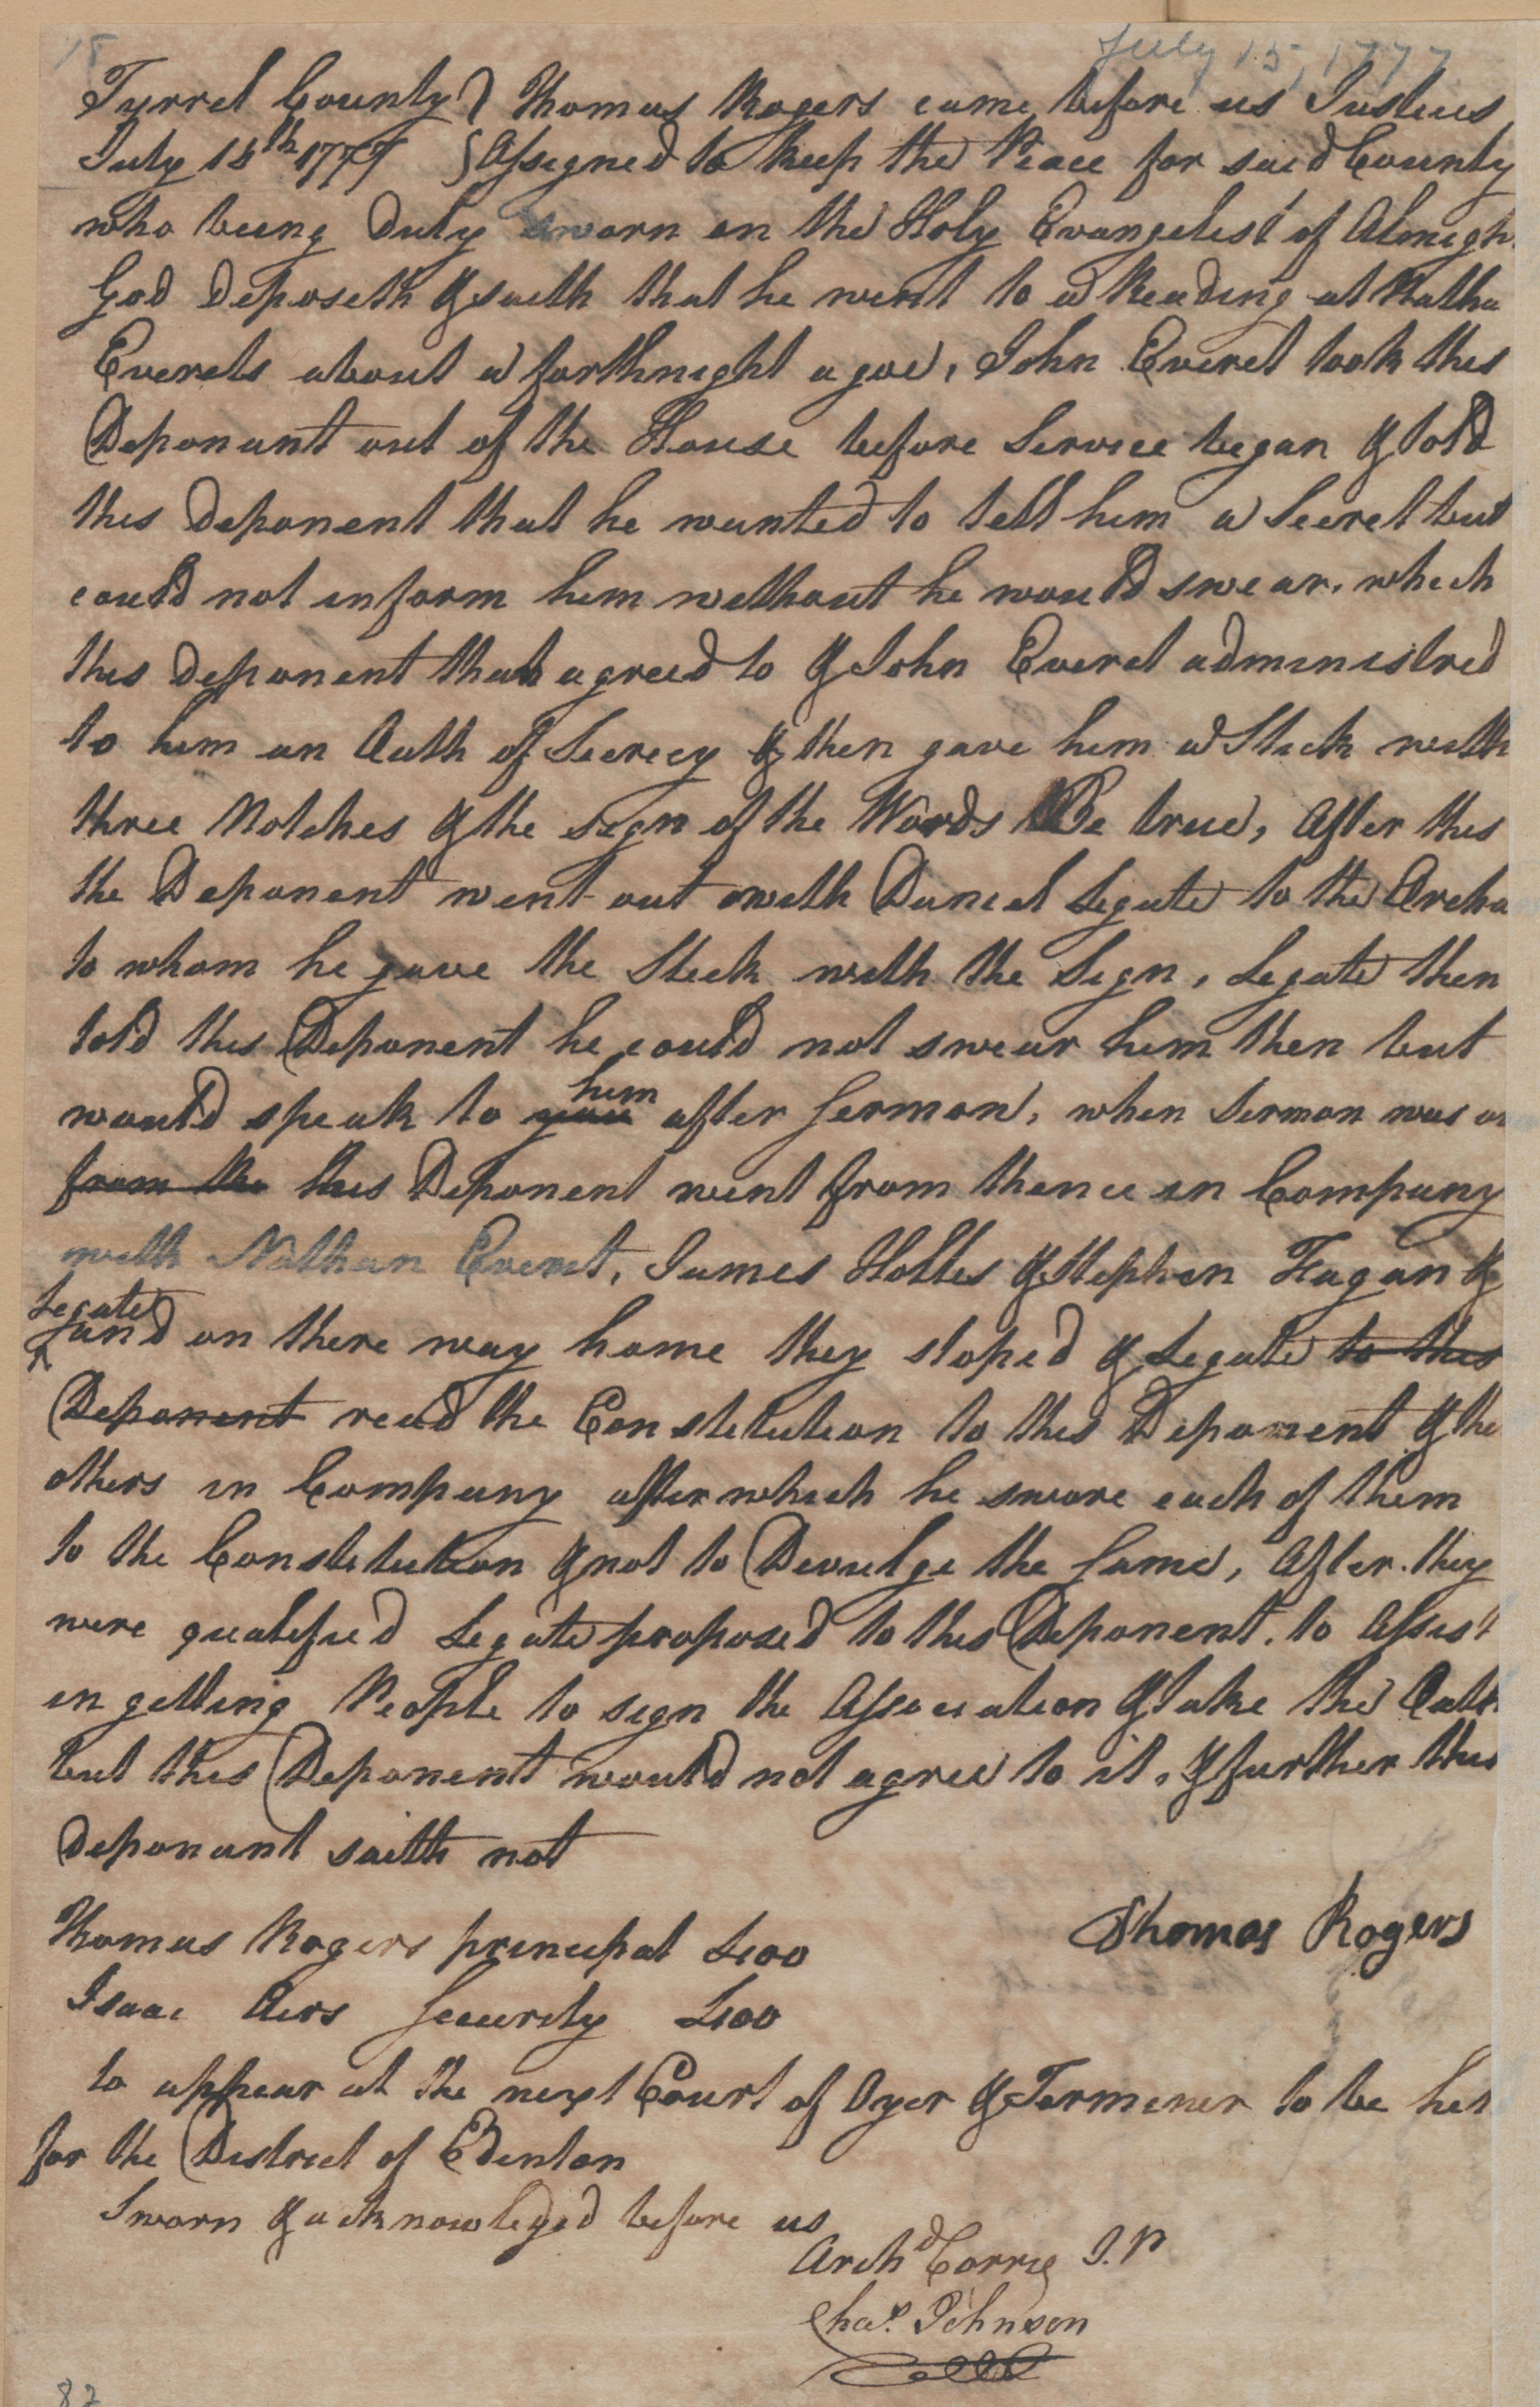 Deposition of Thomas Rogers, 18 July 1777, page 1